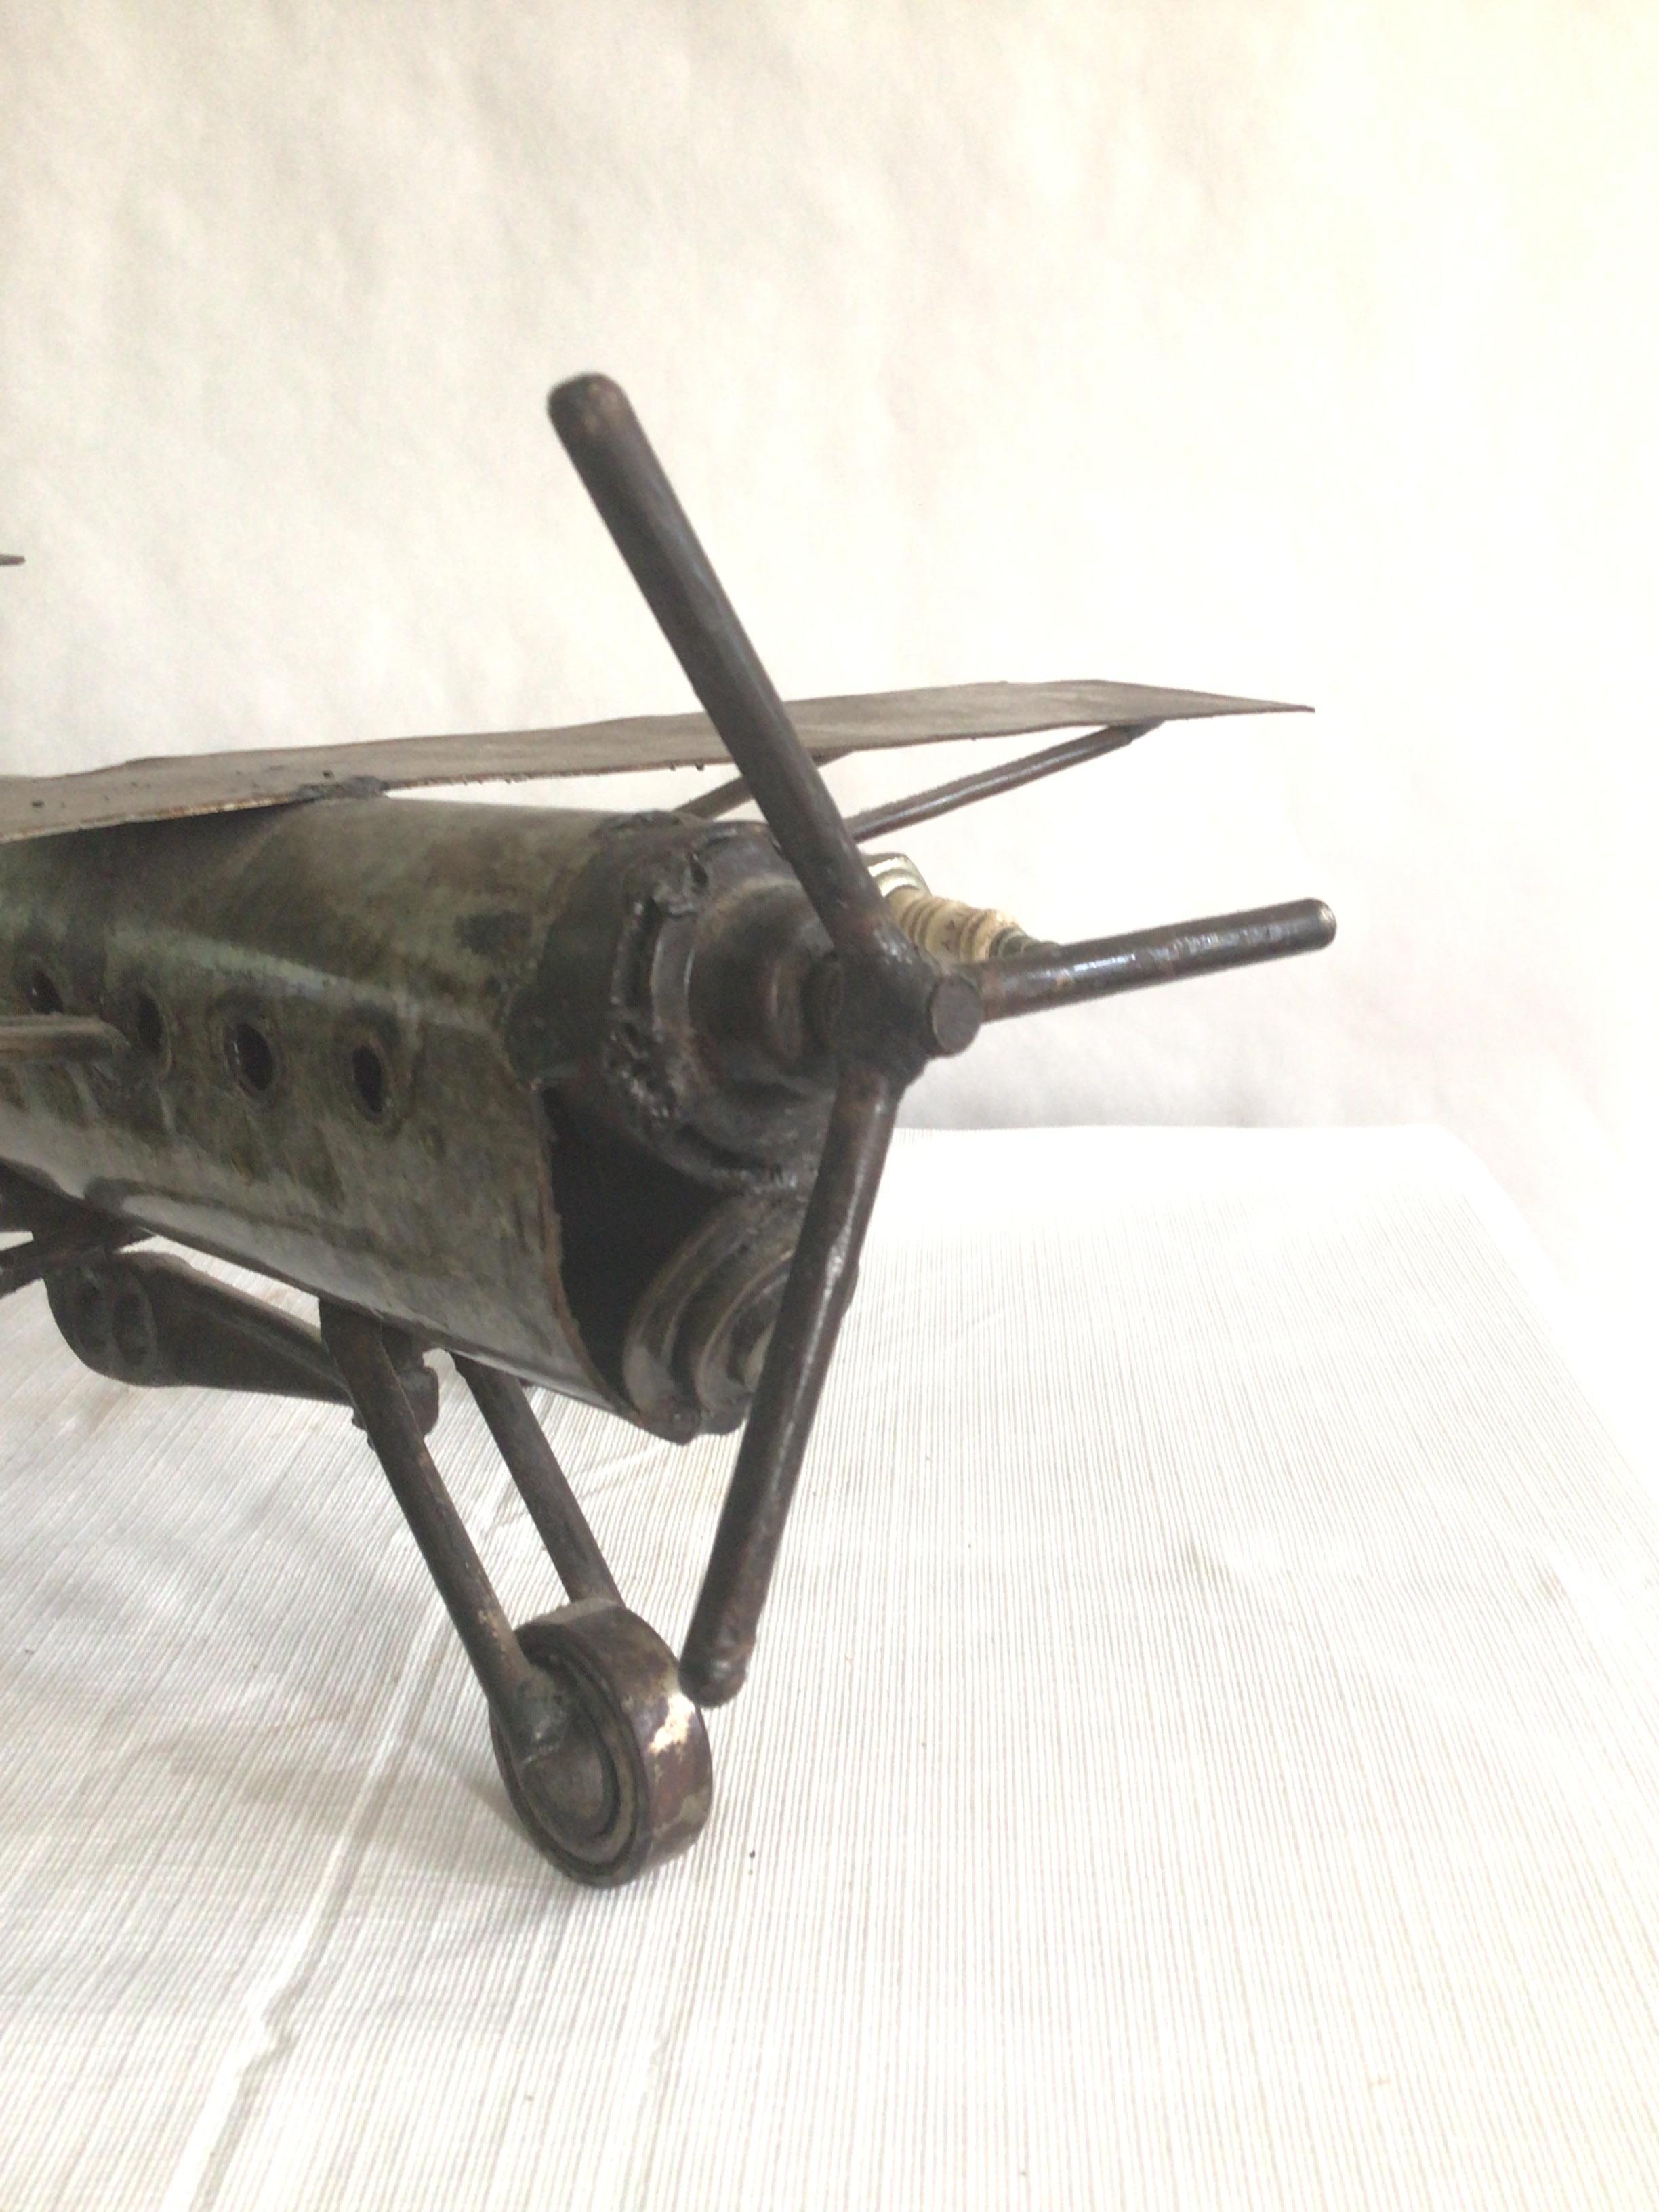 1960s Steel Industrial Airplane Sculpture In Good Condition For Sale In Tarrytown, NY